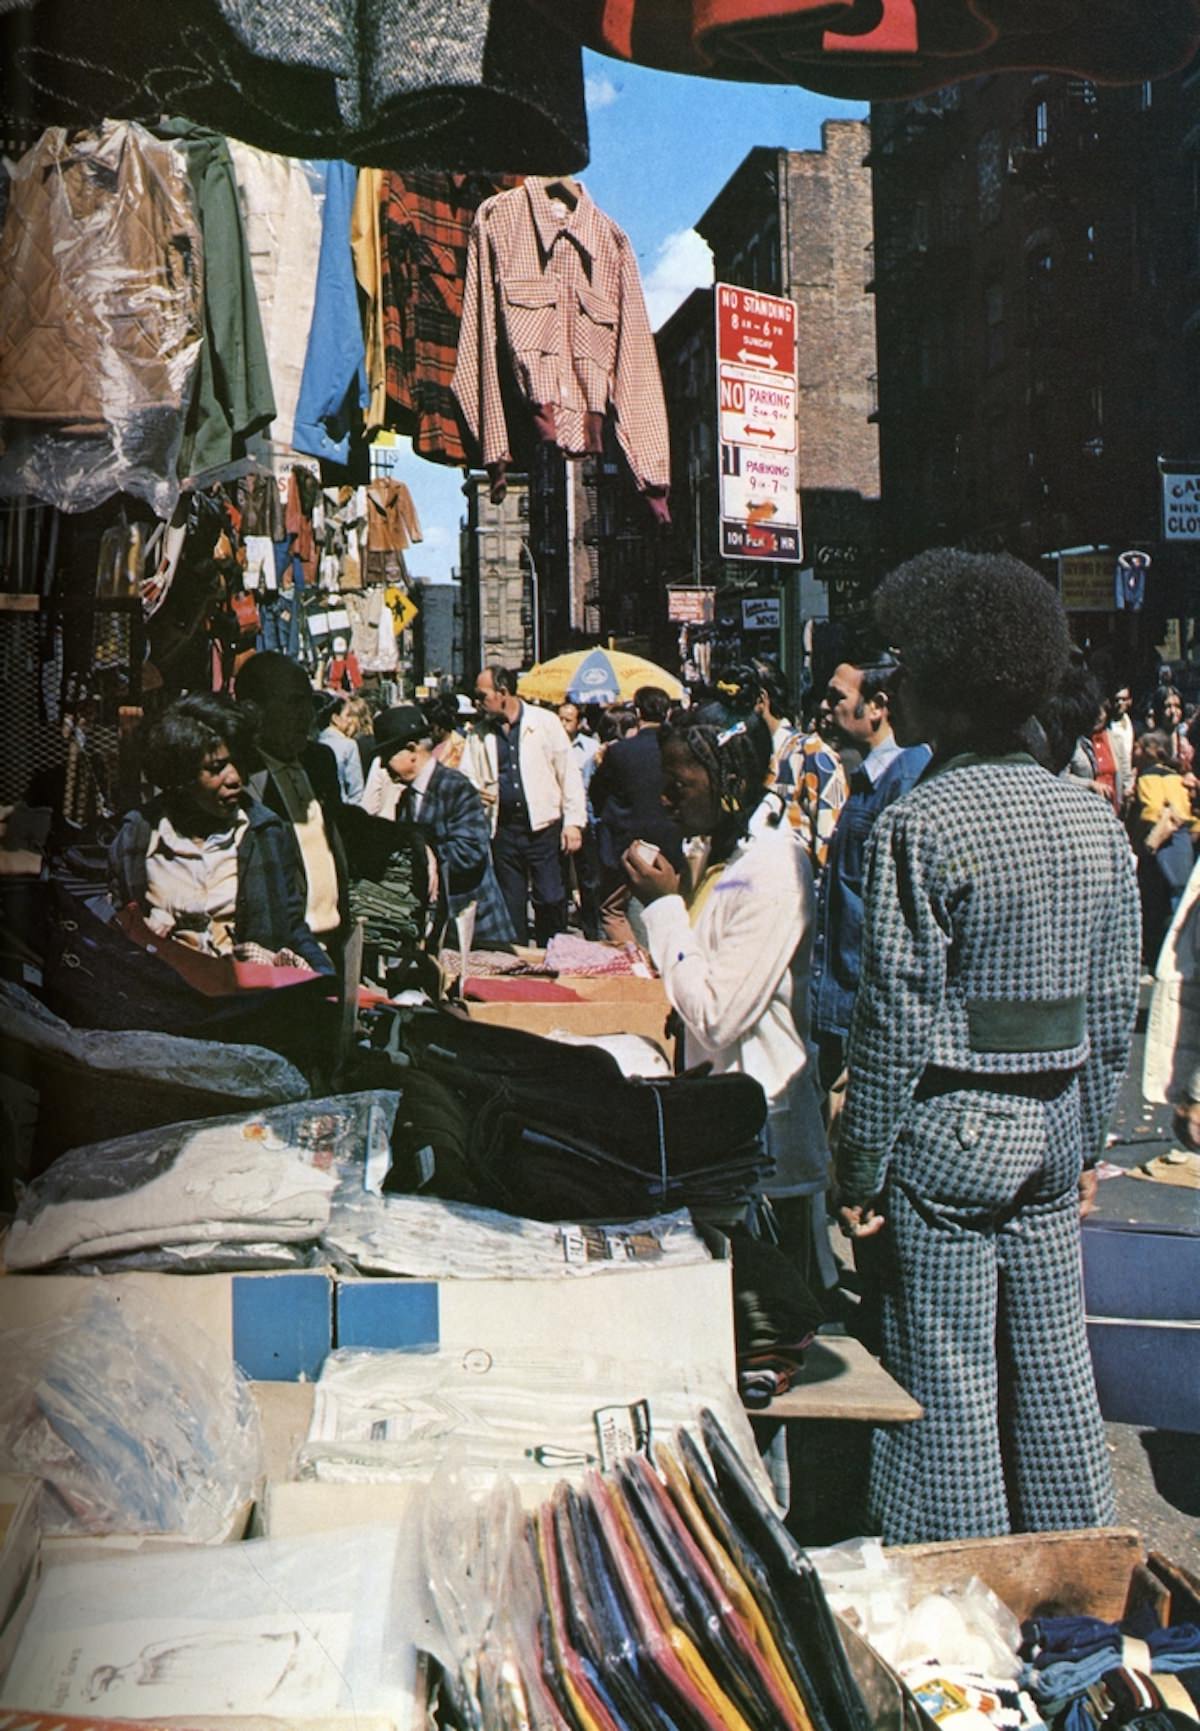 A Gritty Snapshot: 30 Amazing Photos of New York City’s Streets in the 1970s